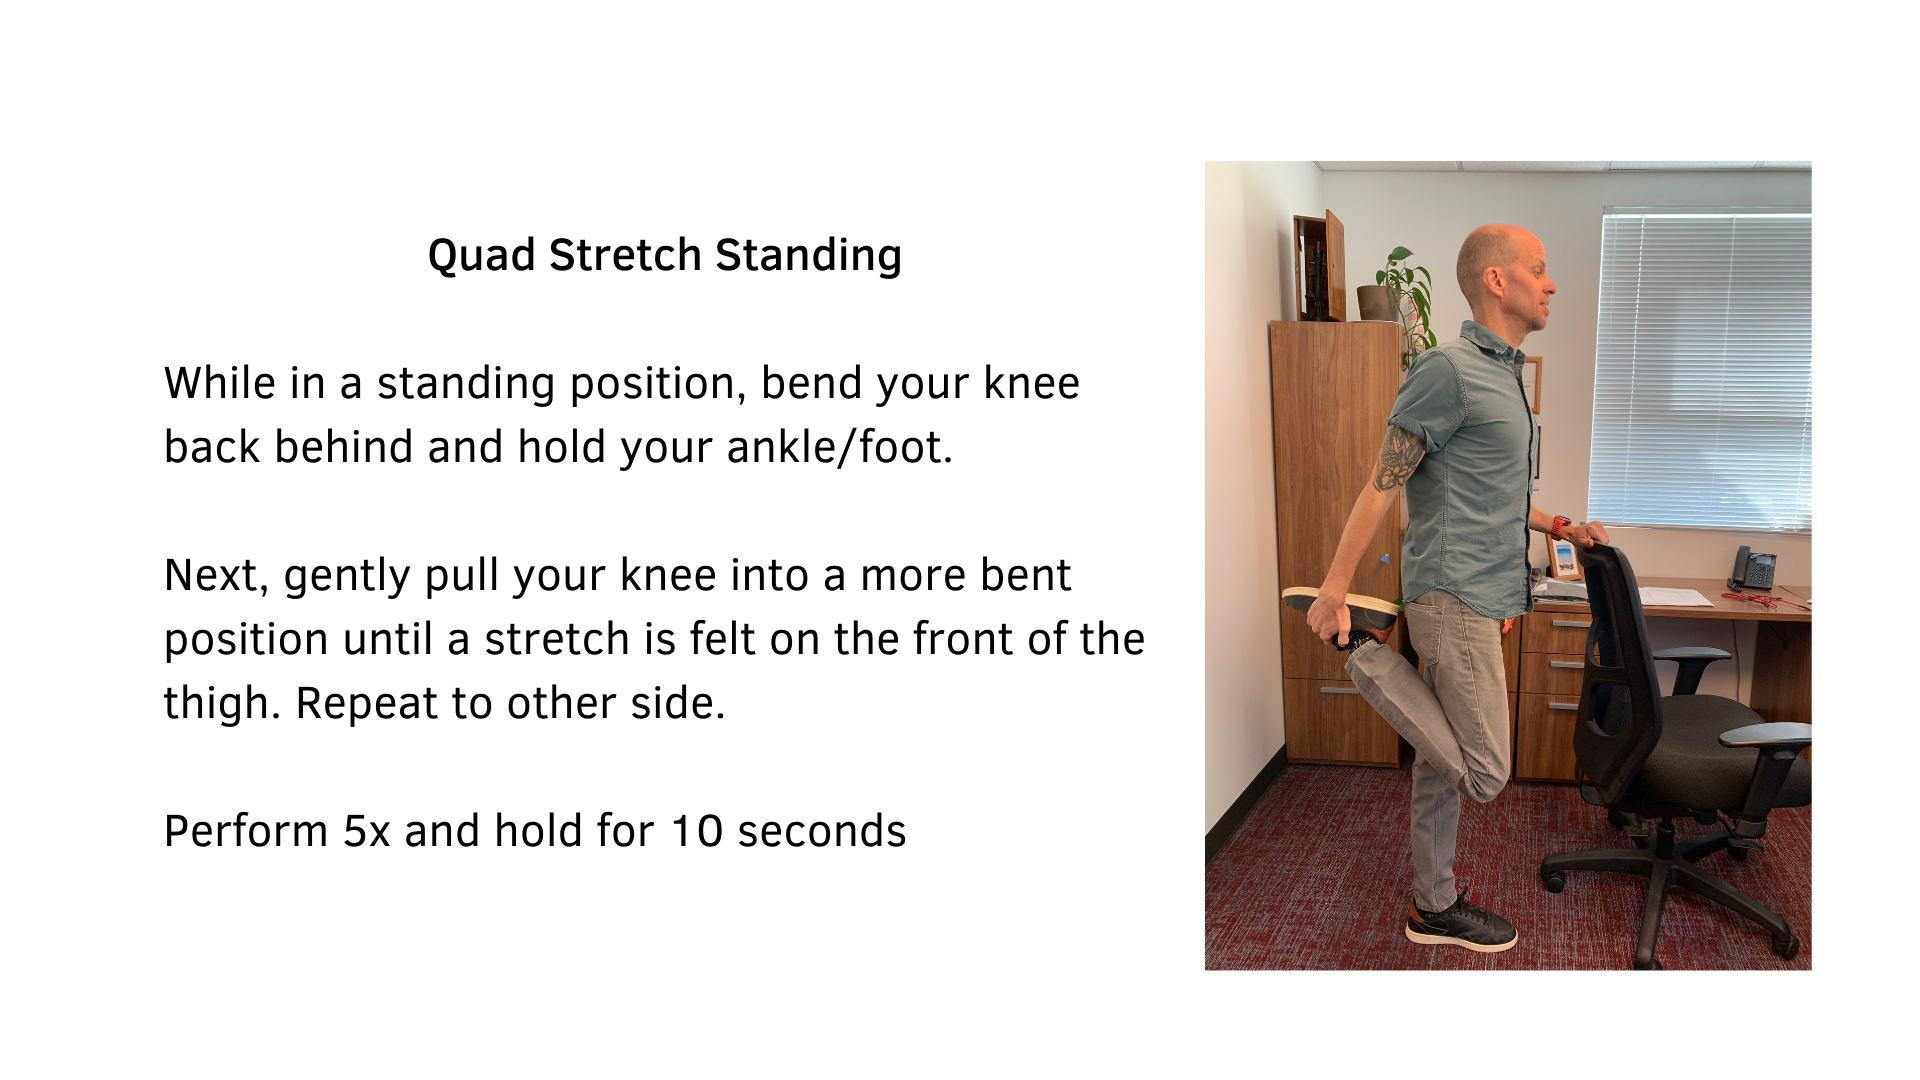 Black text on a white background that reads, "Quad Stretch Standing: While in a standing position, bend your knee back behind and hold your ankle/foot. Next, gently pull your knee into a more bent position until a stretch is felt on the front of the thigh. Repeat to the other side. Perform 5x and hold for 10 seconds". A picture of a man standing behind a chair performing the stretch is featured.